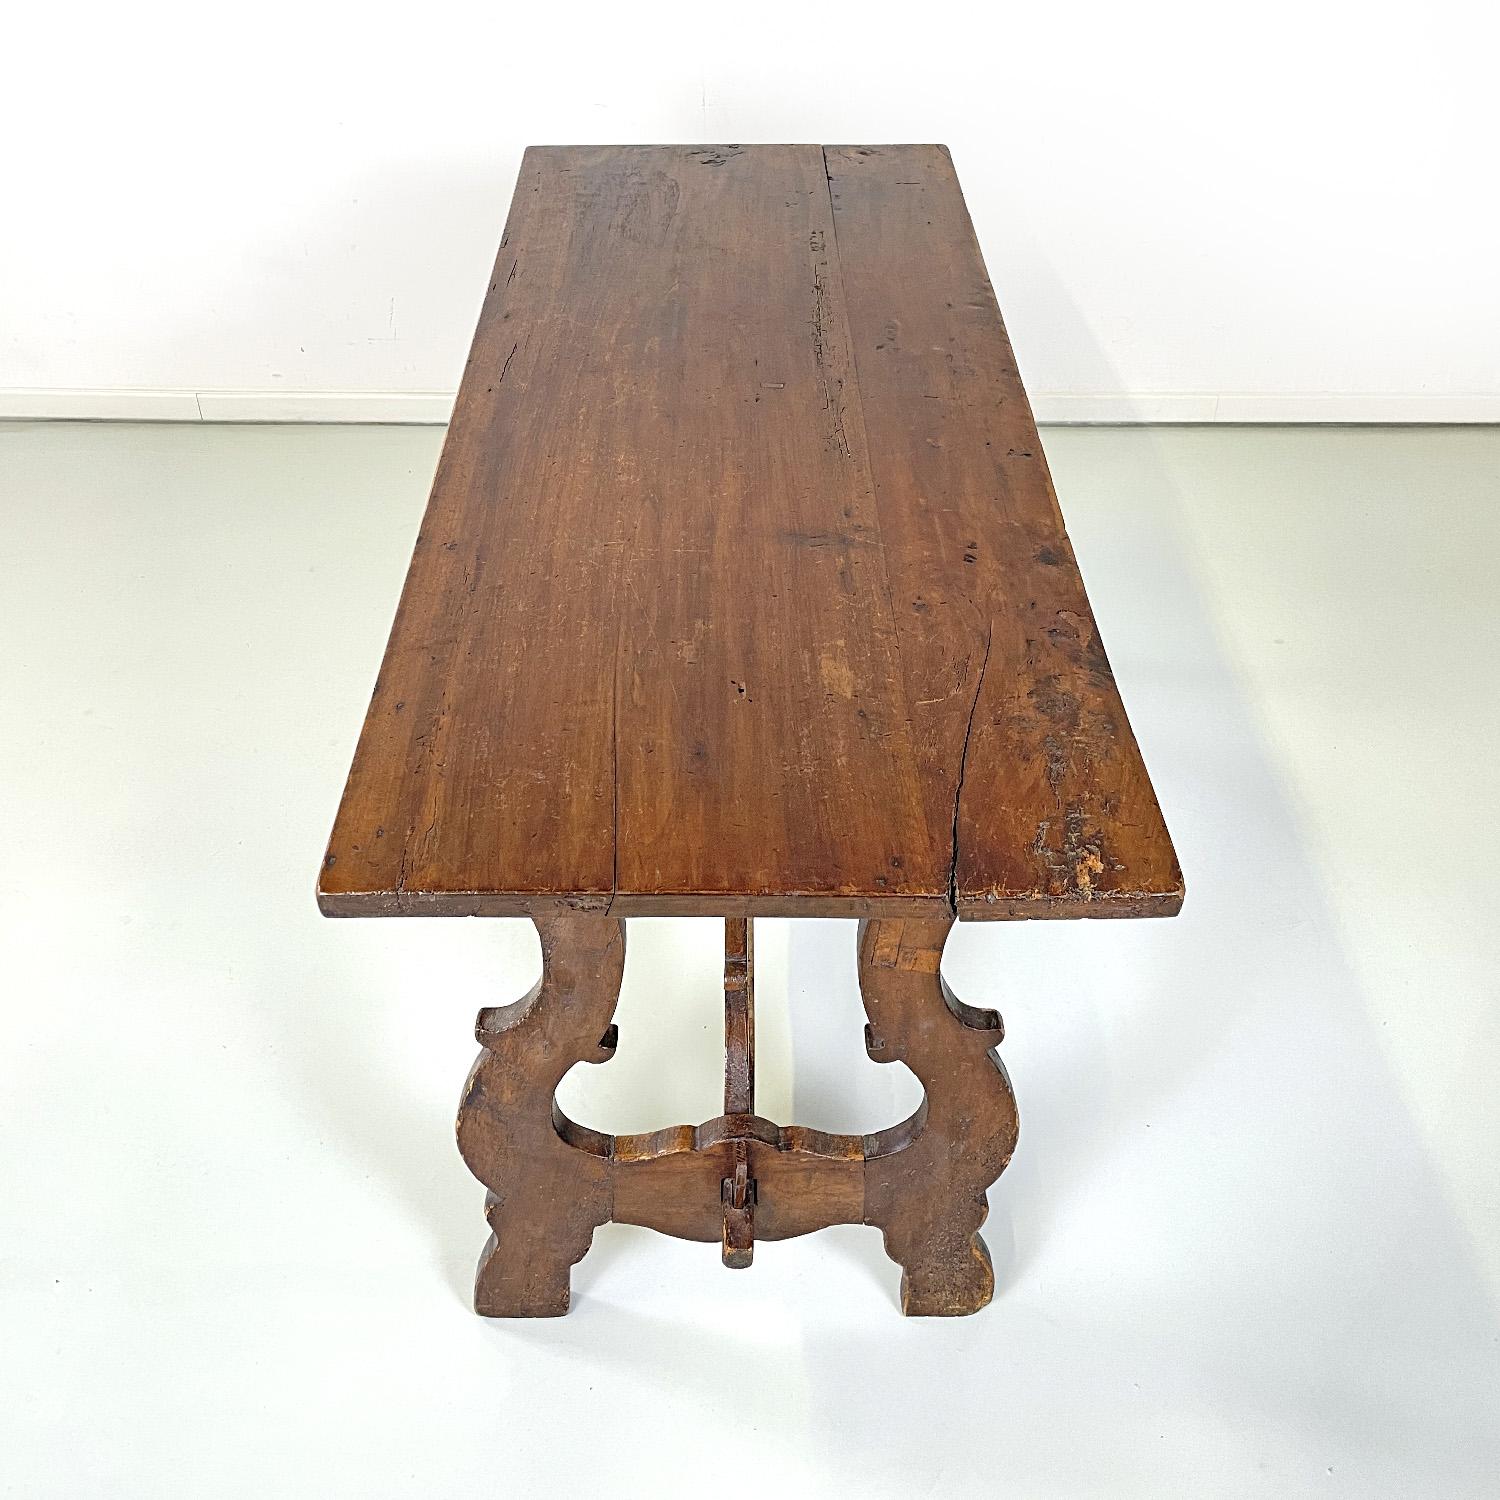 Early 19th Century Italian antique wooden table with lyre legs, 1800s  For Sale